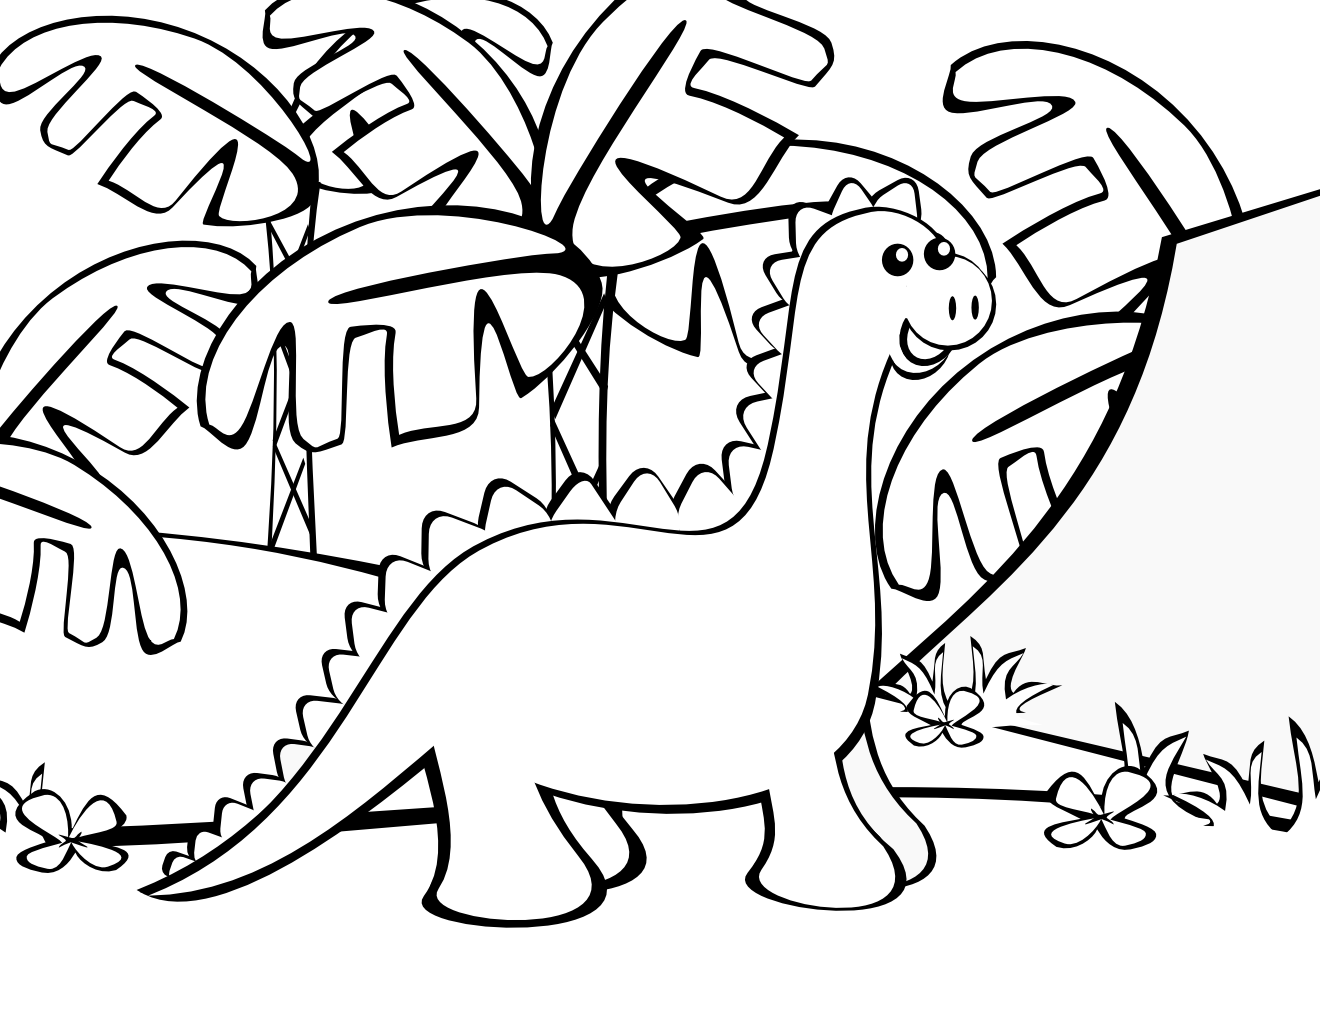 dinosaur colouring page printable dinosaur coloring pages for kids cool2bkids page colouring dinosaur 